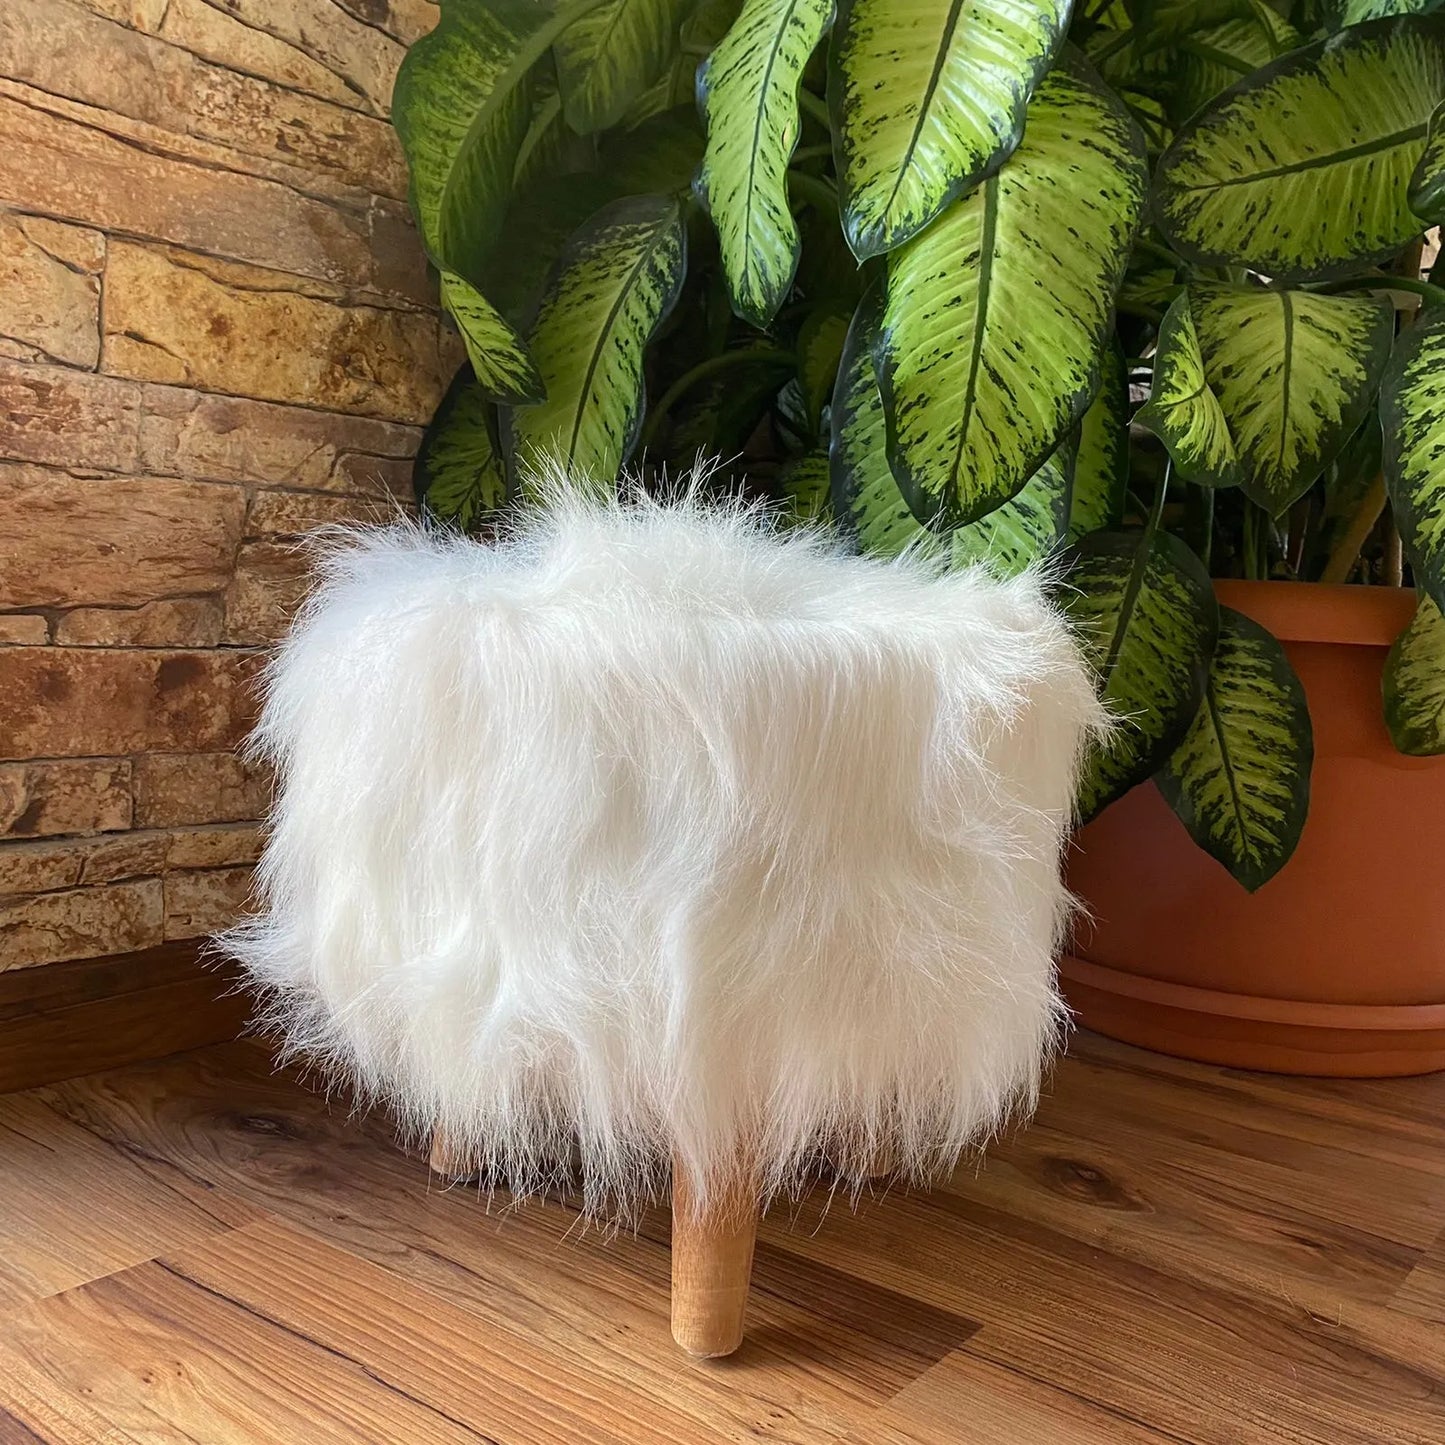 Avioni Home Luxury Collection – Padded Stool / Ottoman (3 Legs With Natural Finish) – Long White Fur